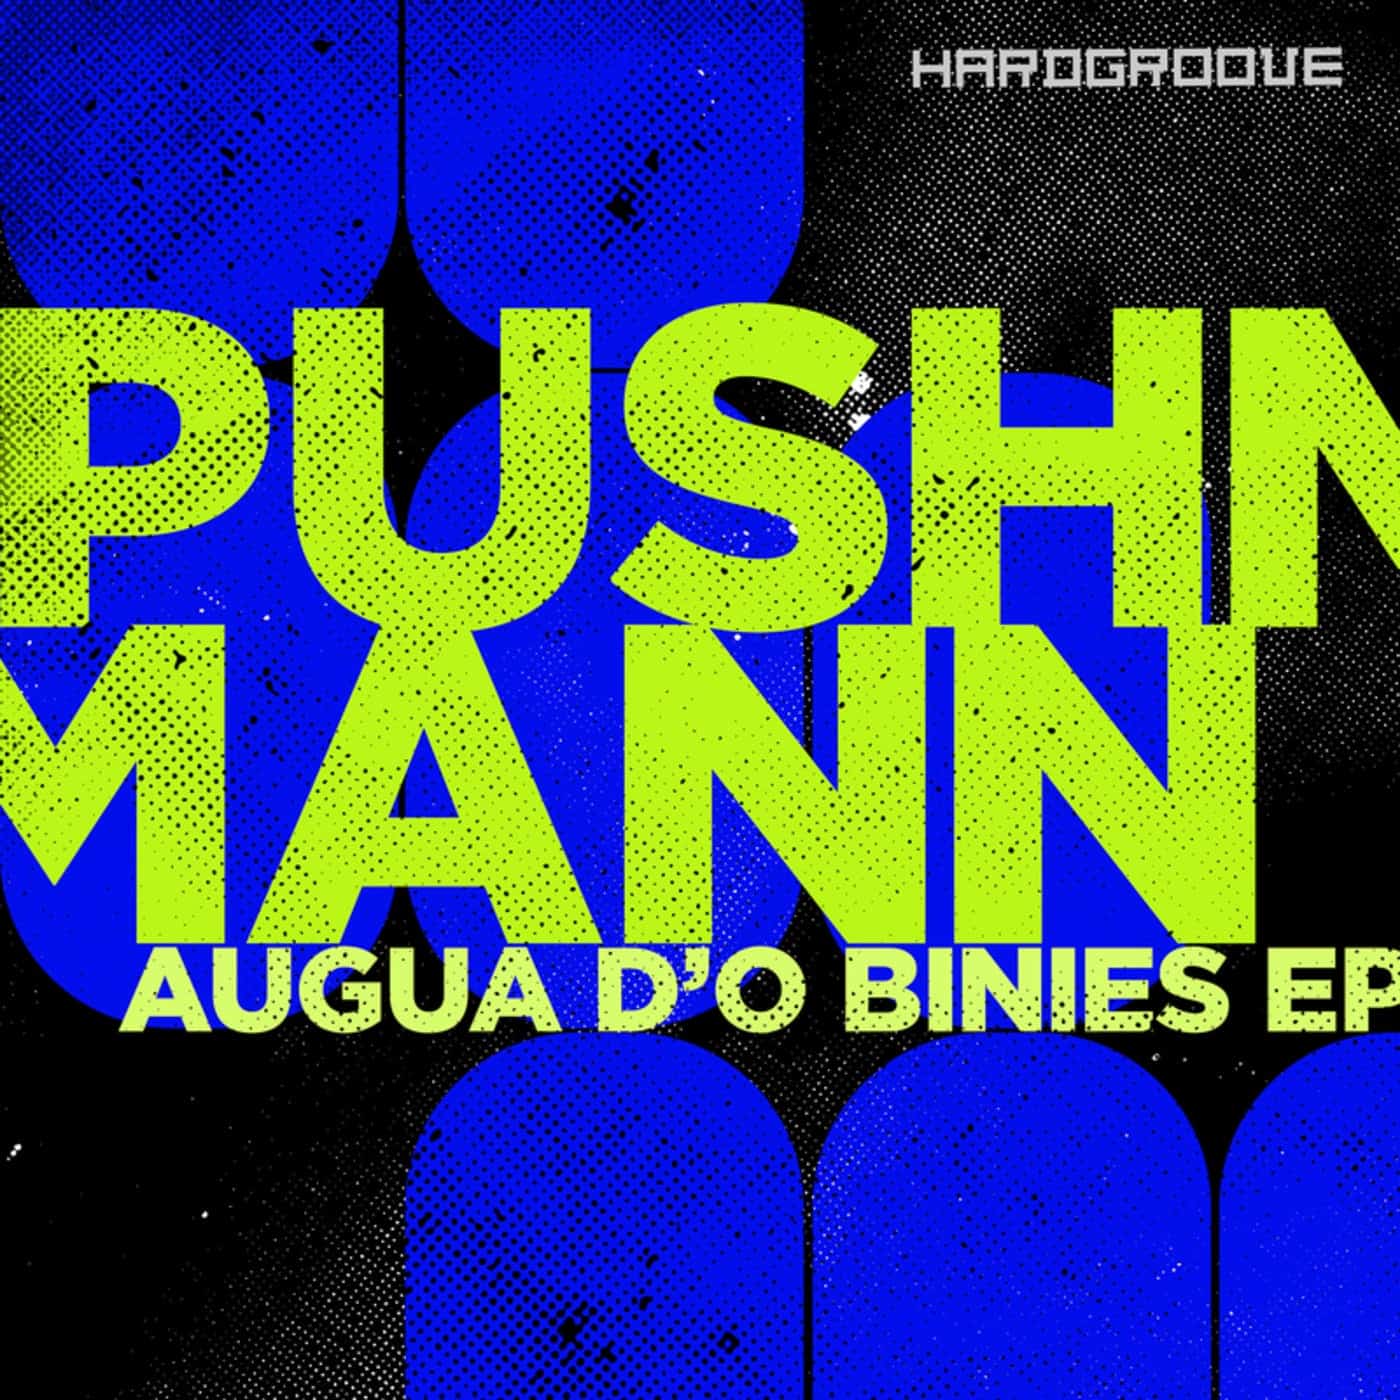 Download PUSHMANN, Vil - Augua Do Binies EP on Electrobuzz